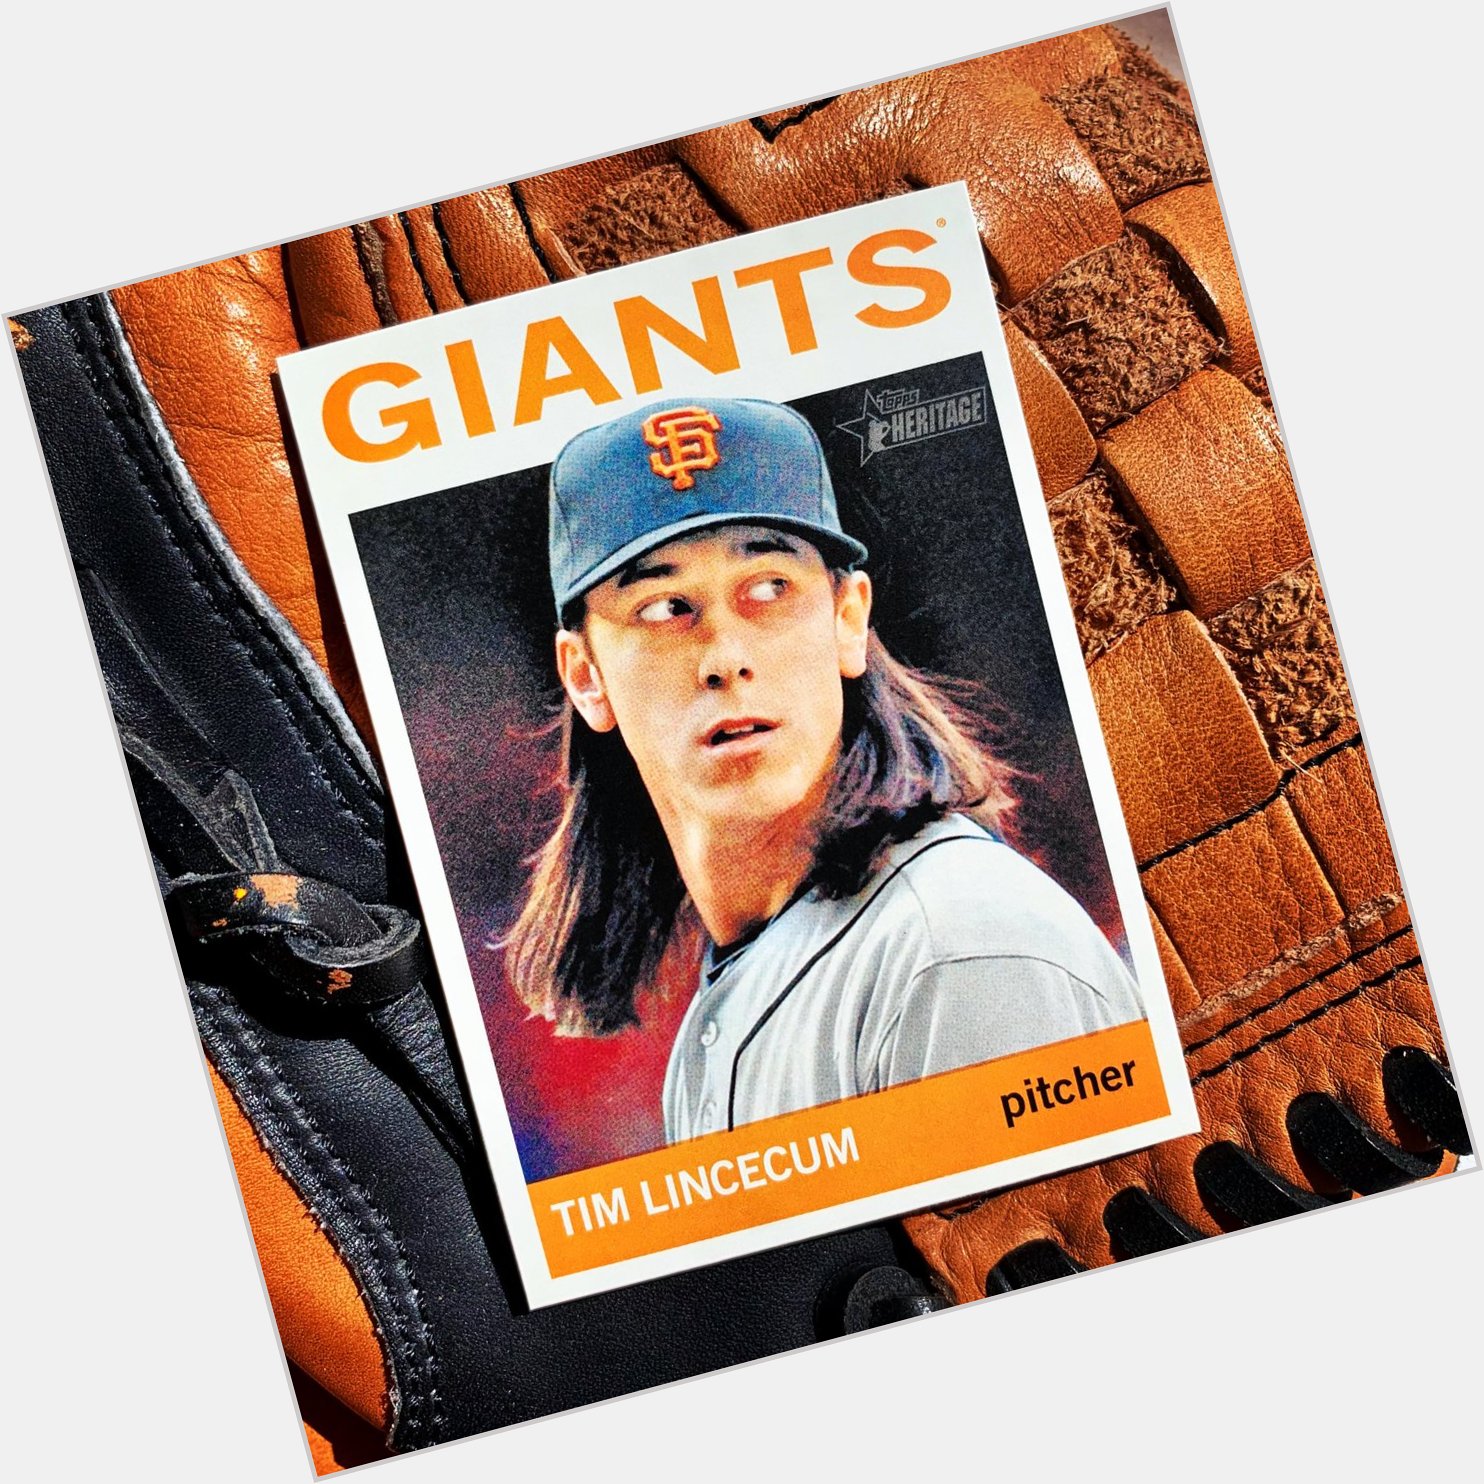 Happy Birthday to the one and only Tim Lincecum!  